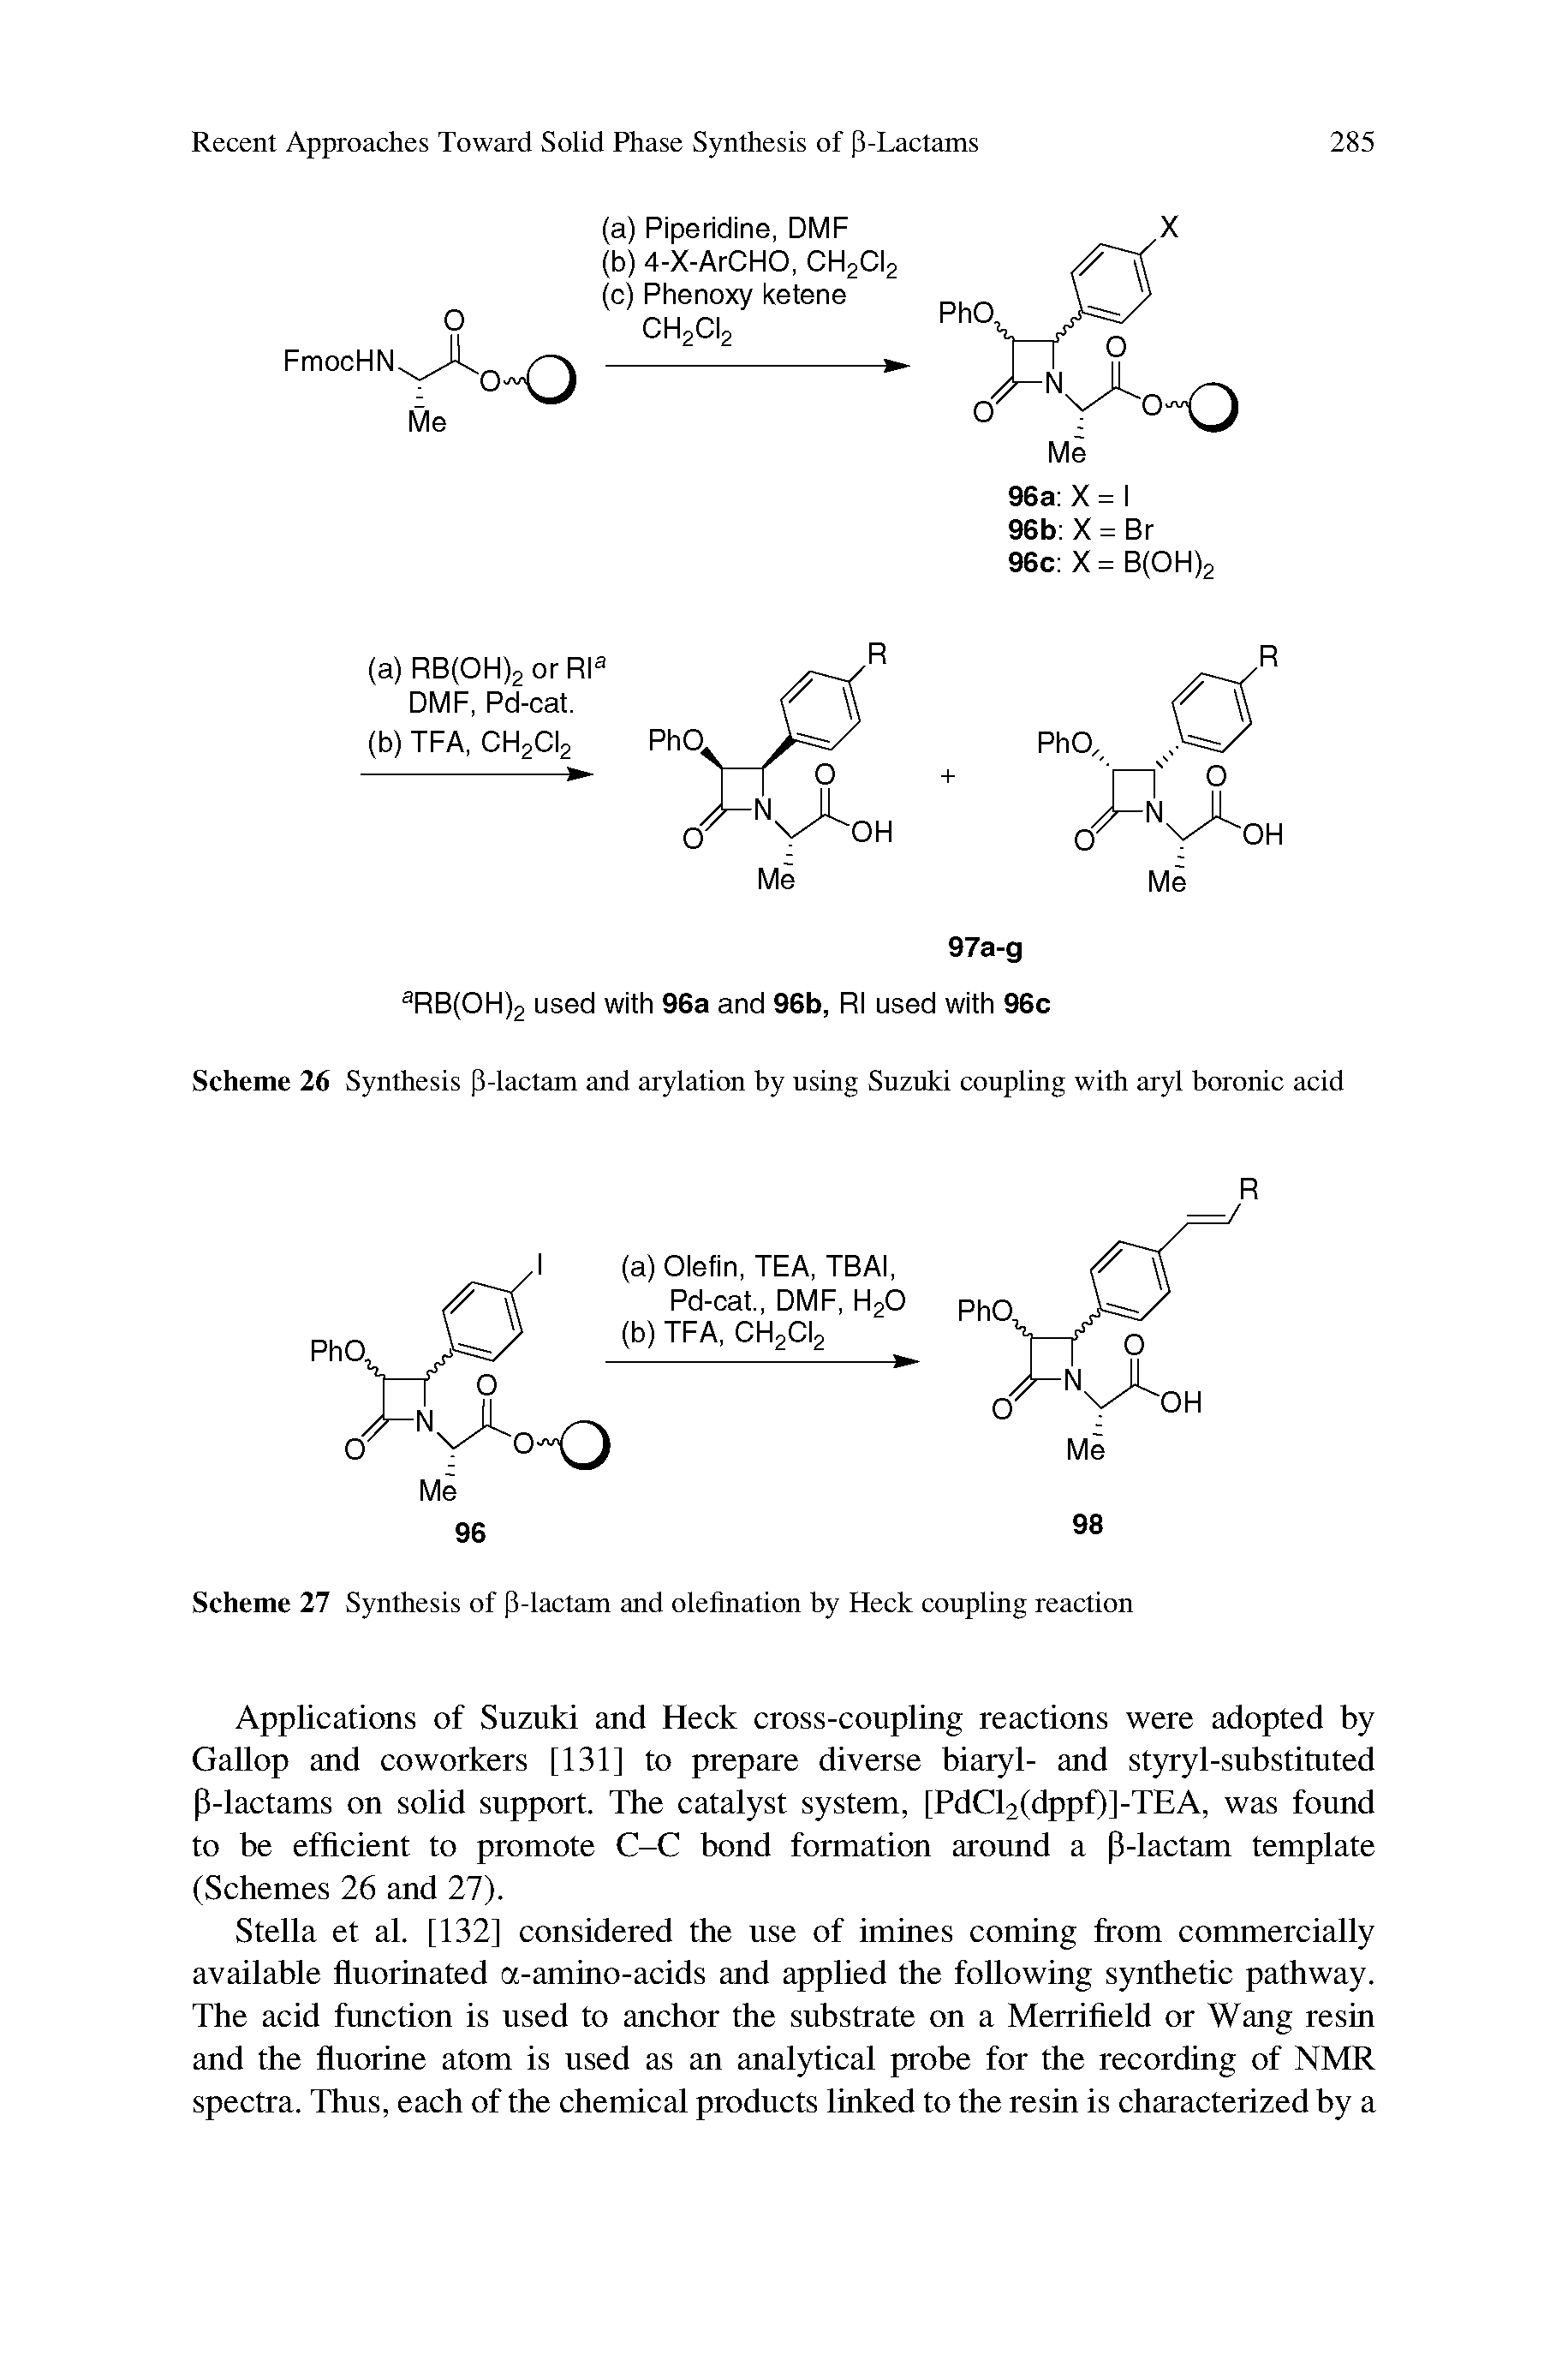 Scheme 27 Synthesis of P-lactam and olefination by Heck coupling reaction...